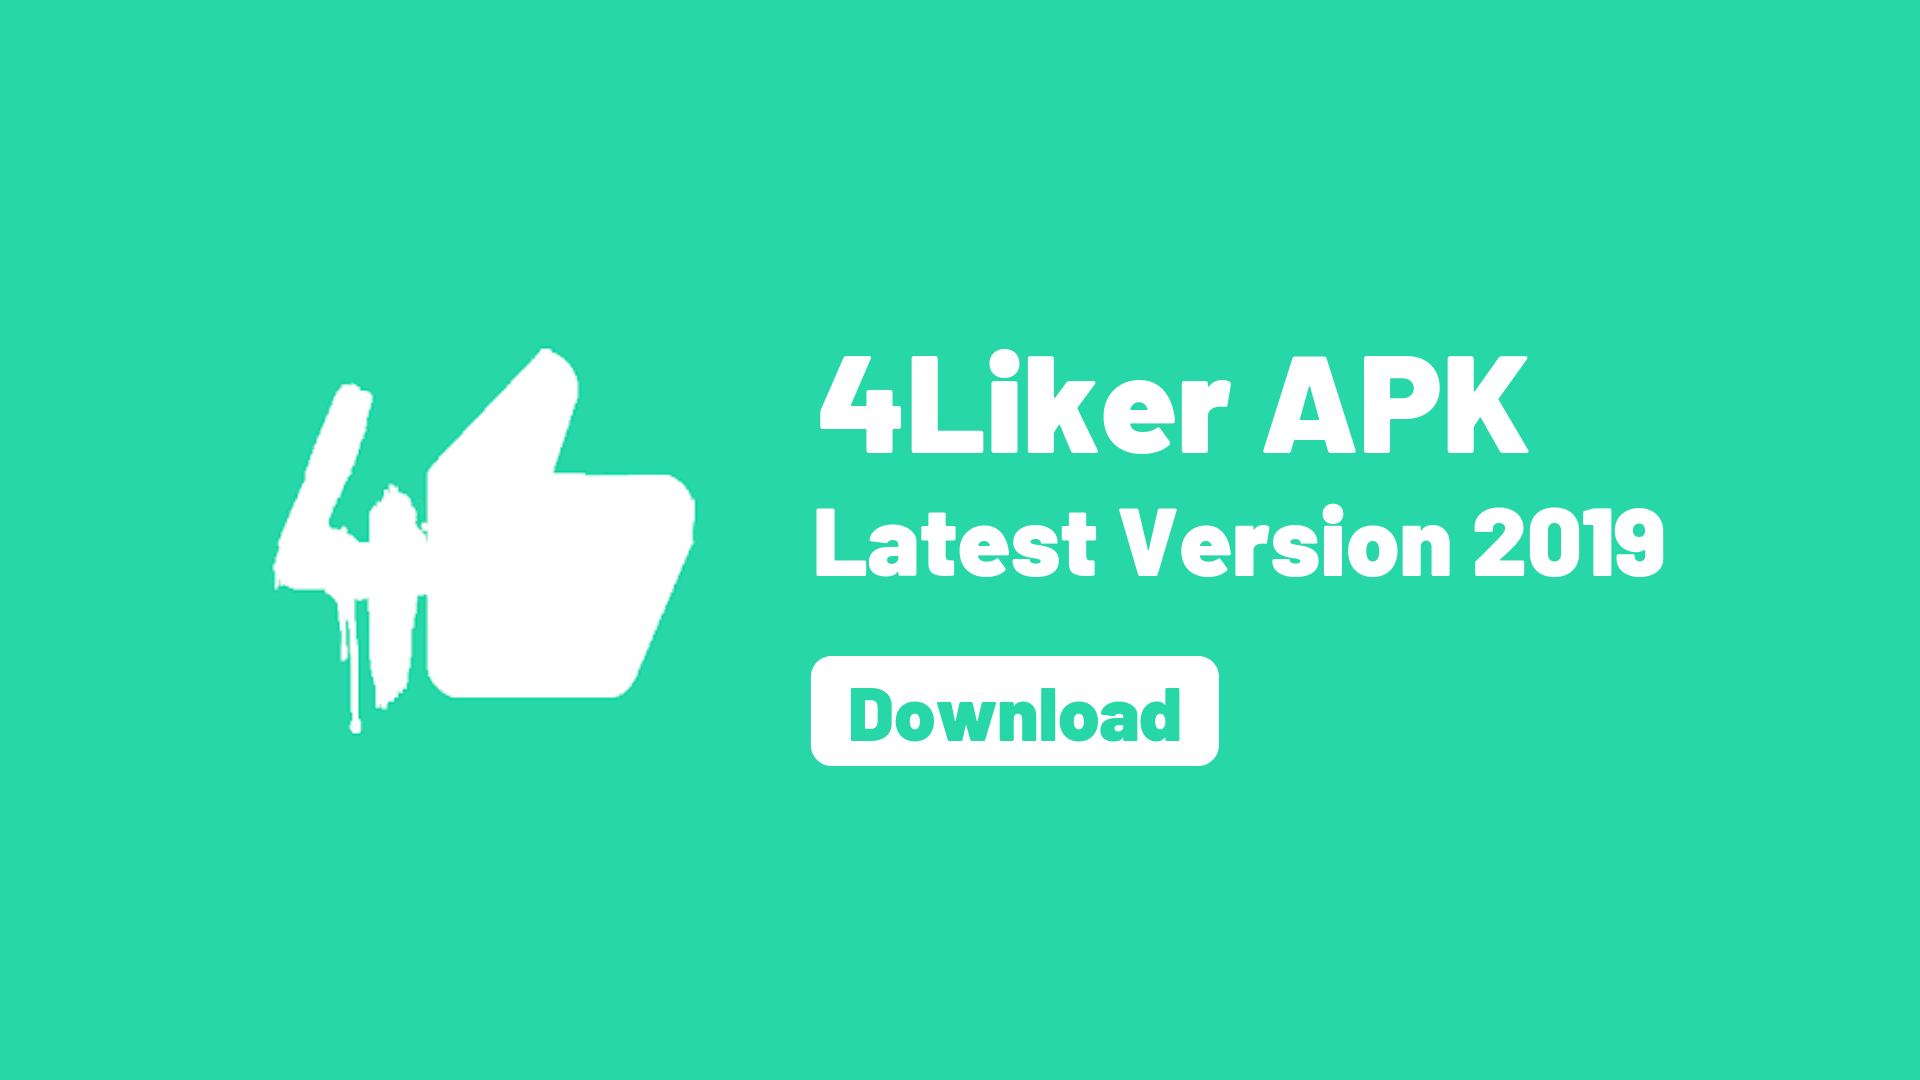 Apk Download 4liker Apk On Android Latest Version 2019